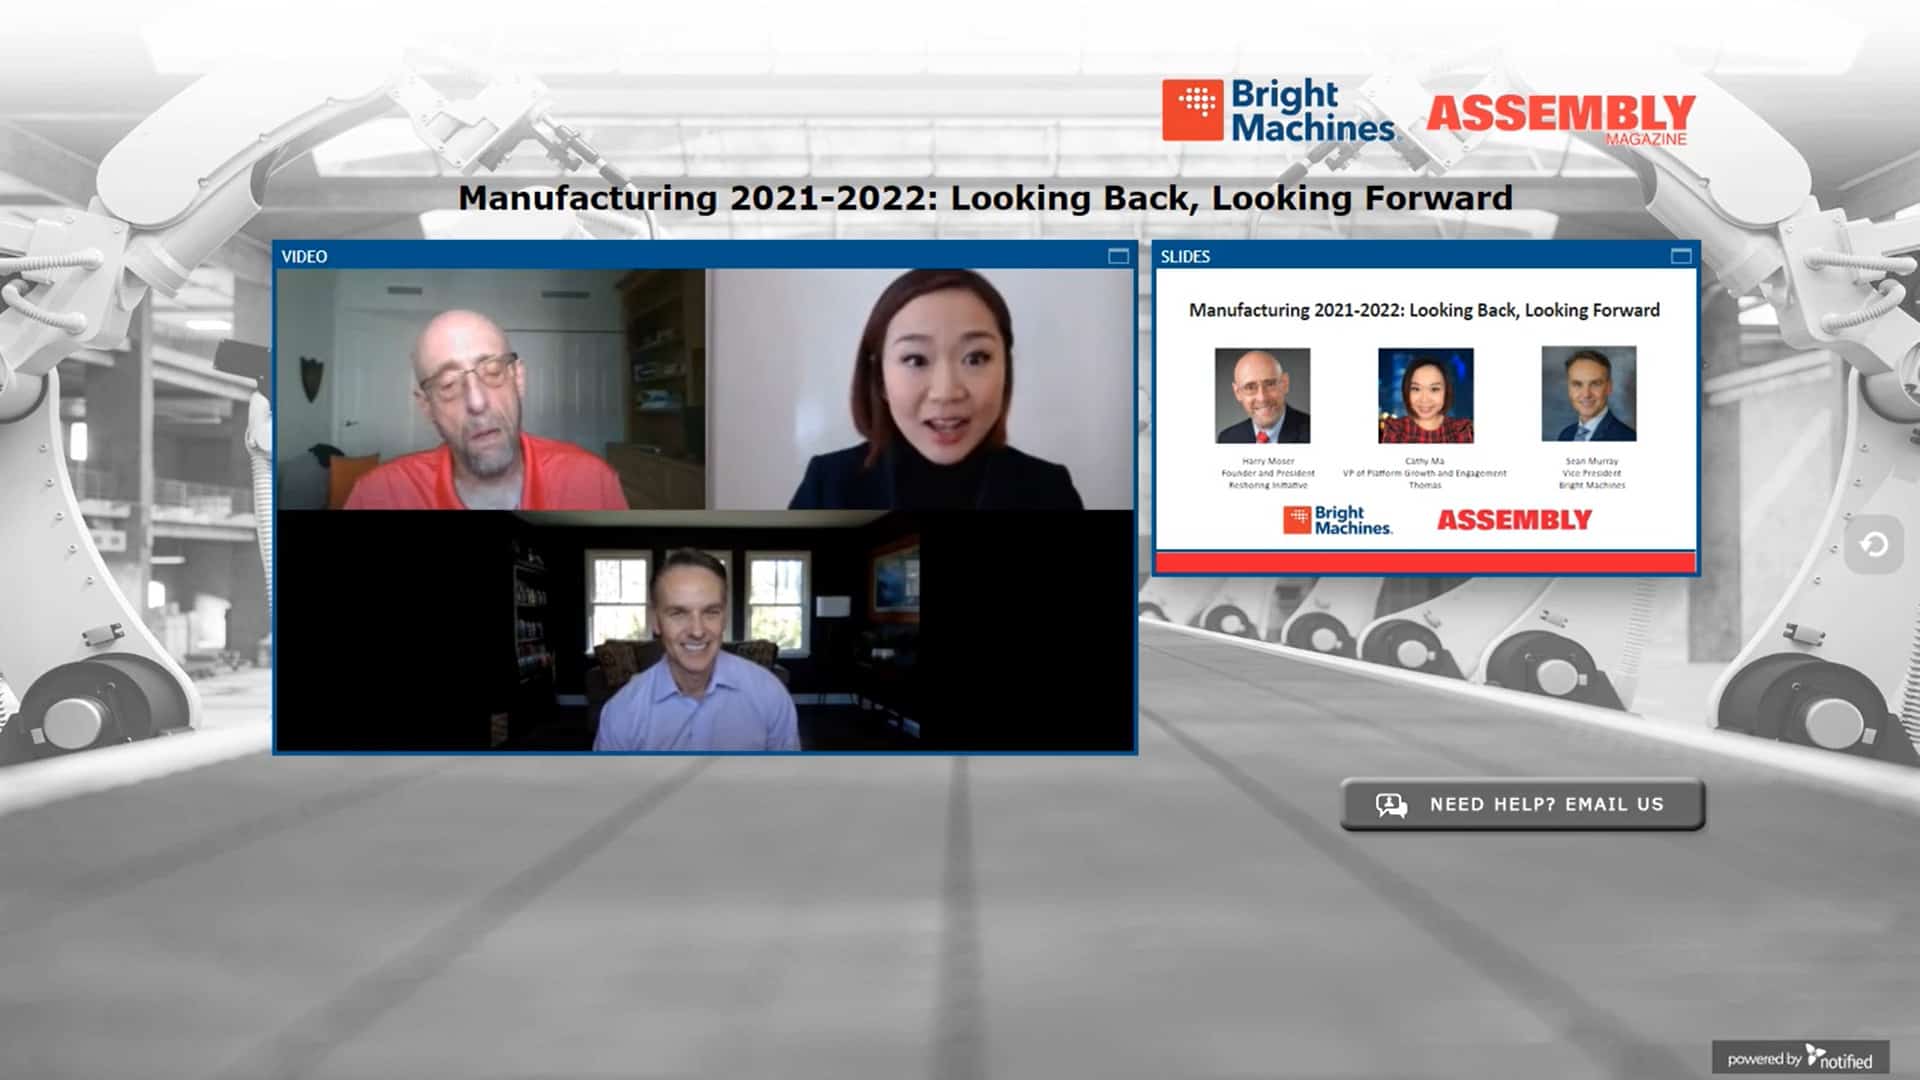 Assembly Magazine: Manufacturing 2021-2022: Looking Back, Looking Forward